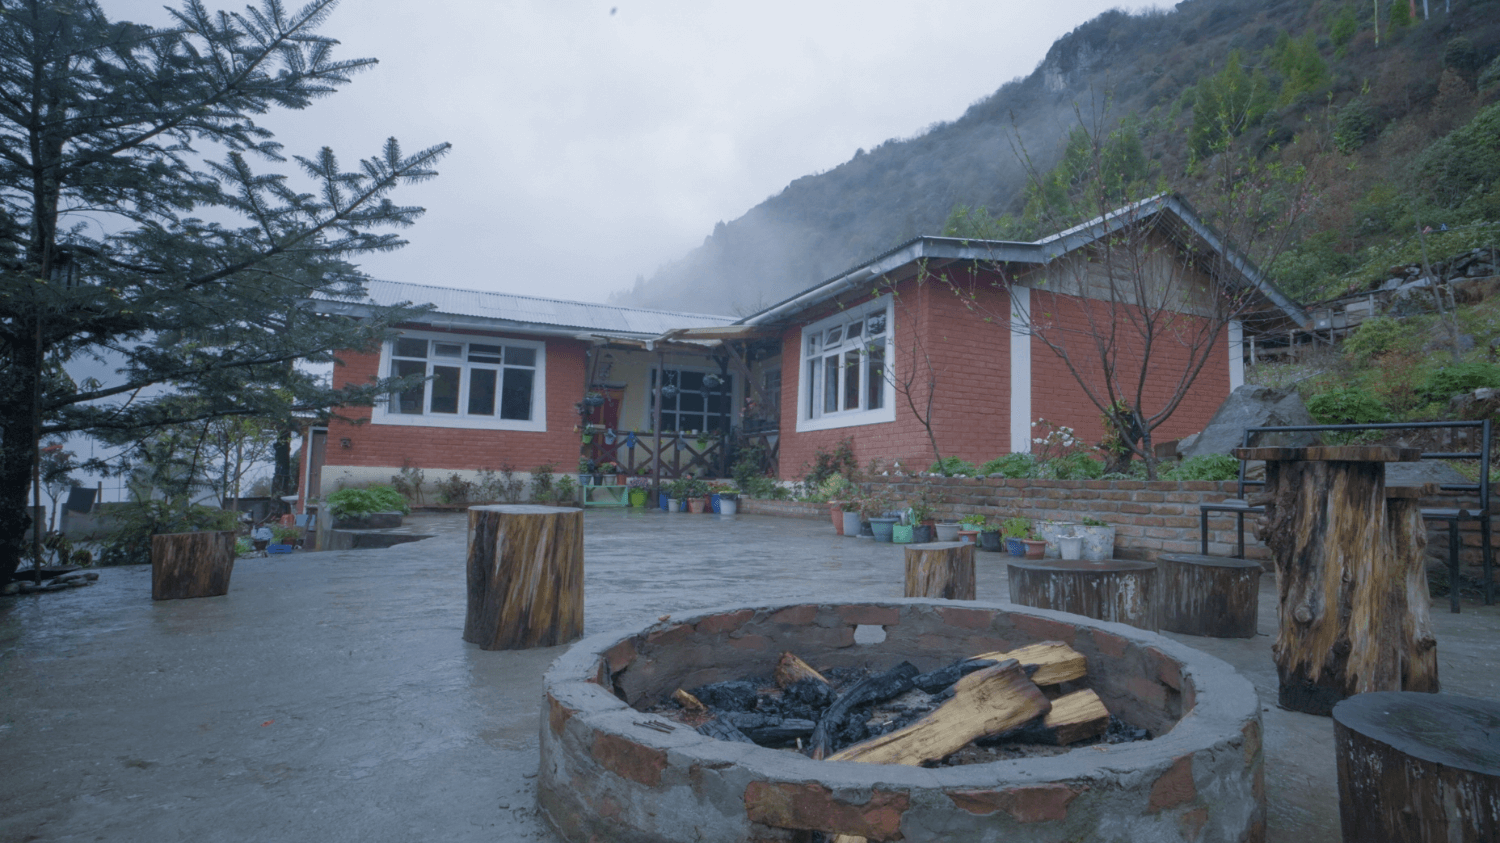 OurGuest Homestay Lachung, Lachung, Sikkim, India